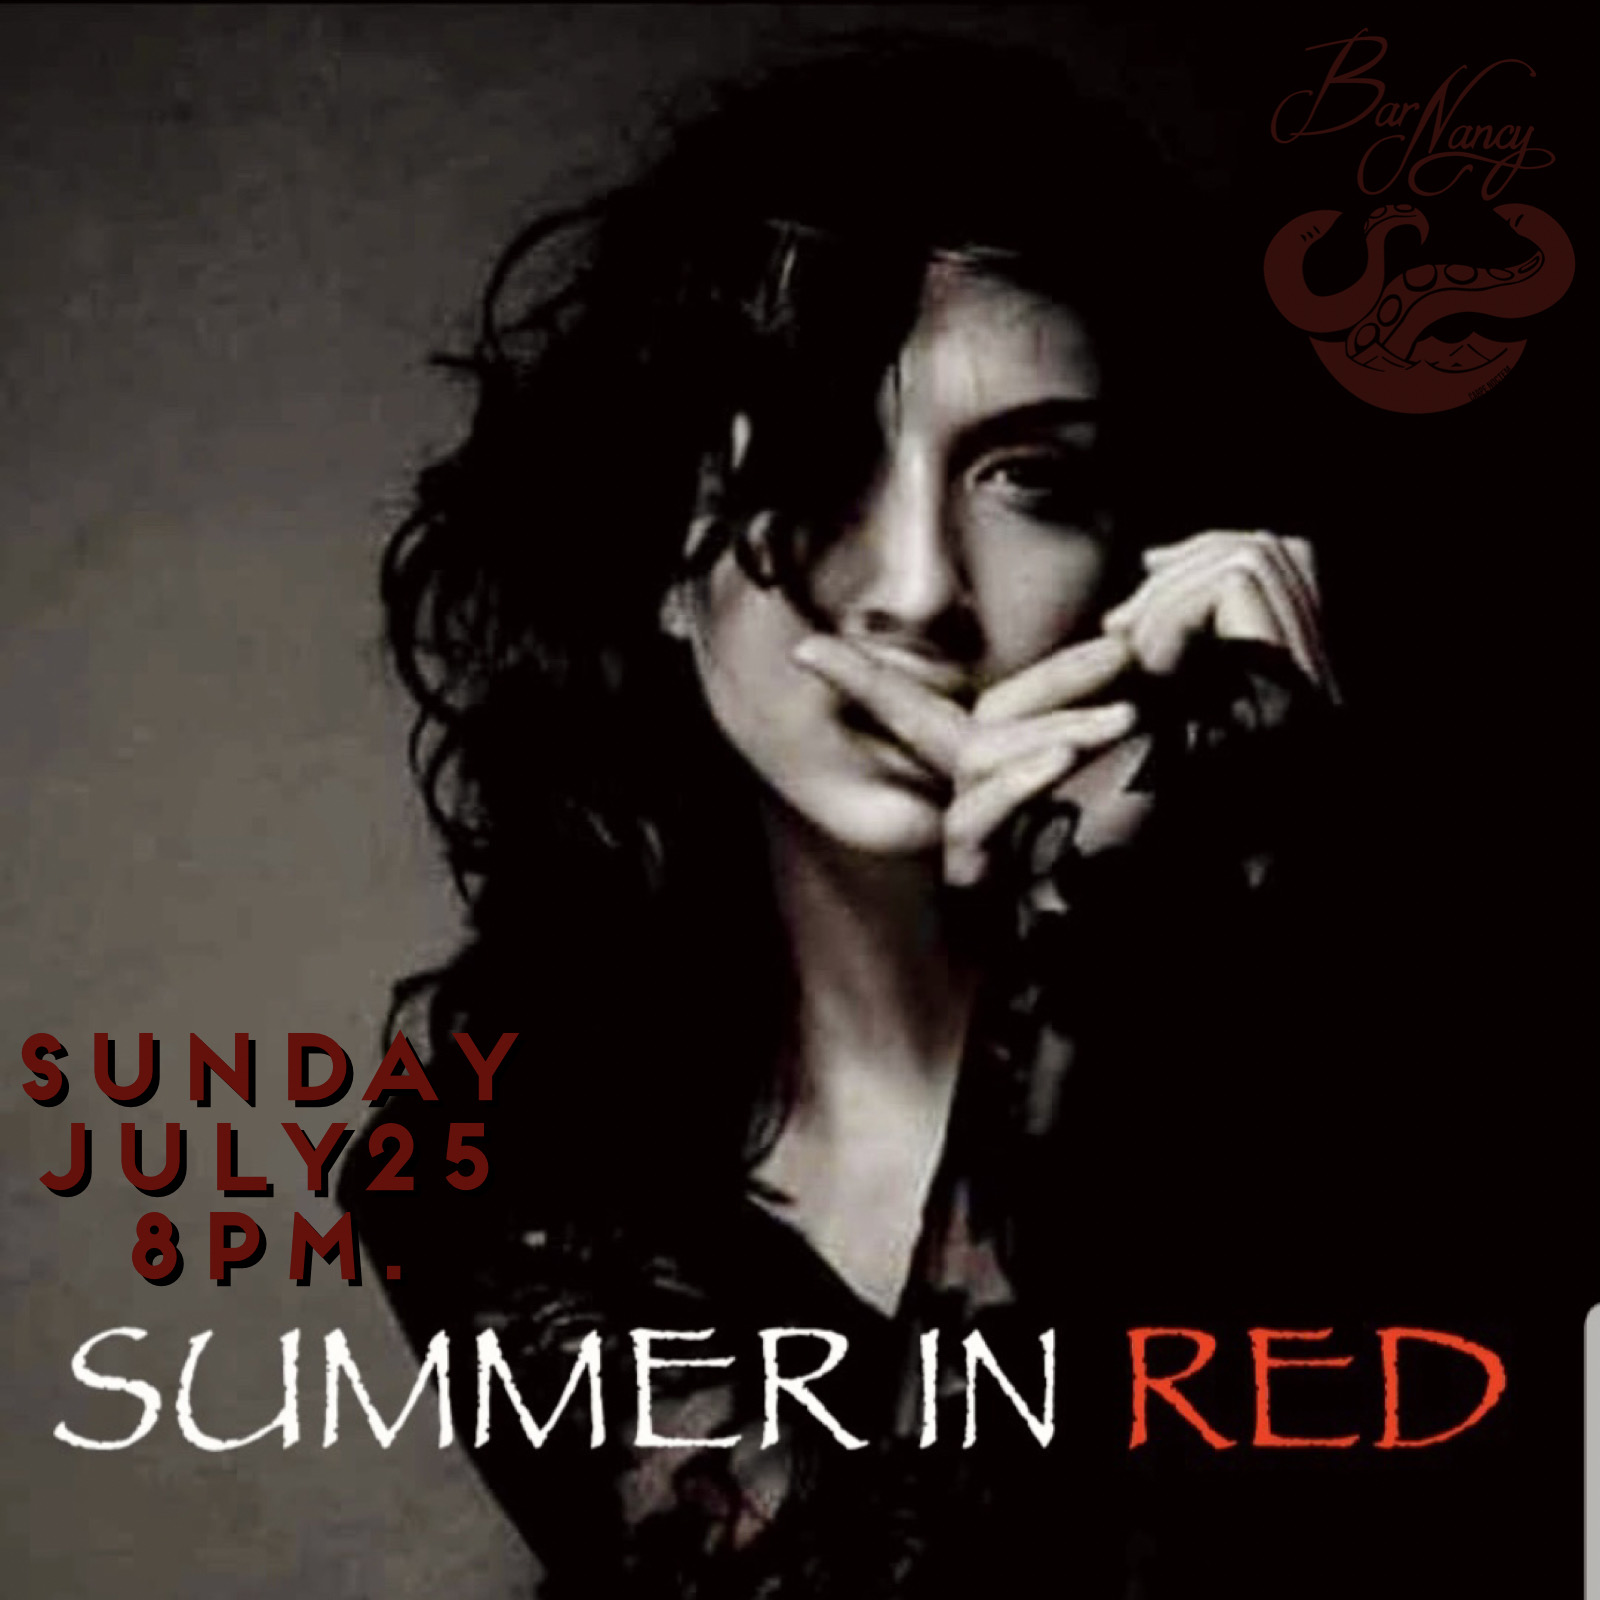 Summer in Red at Bar Nancy - Sunday July 25 - 8PM